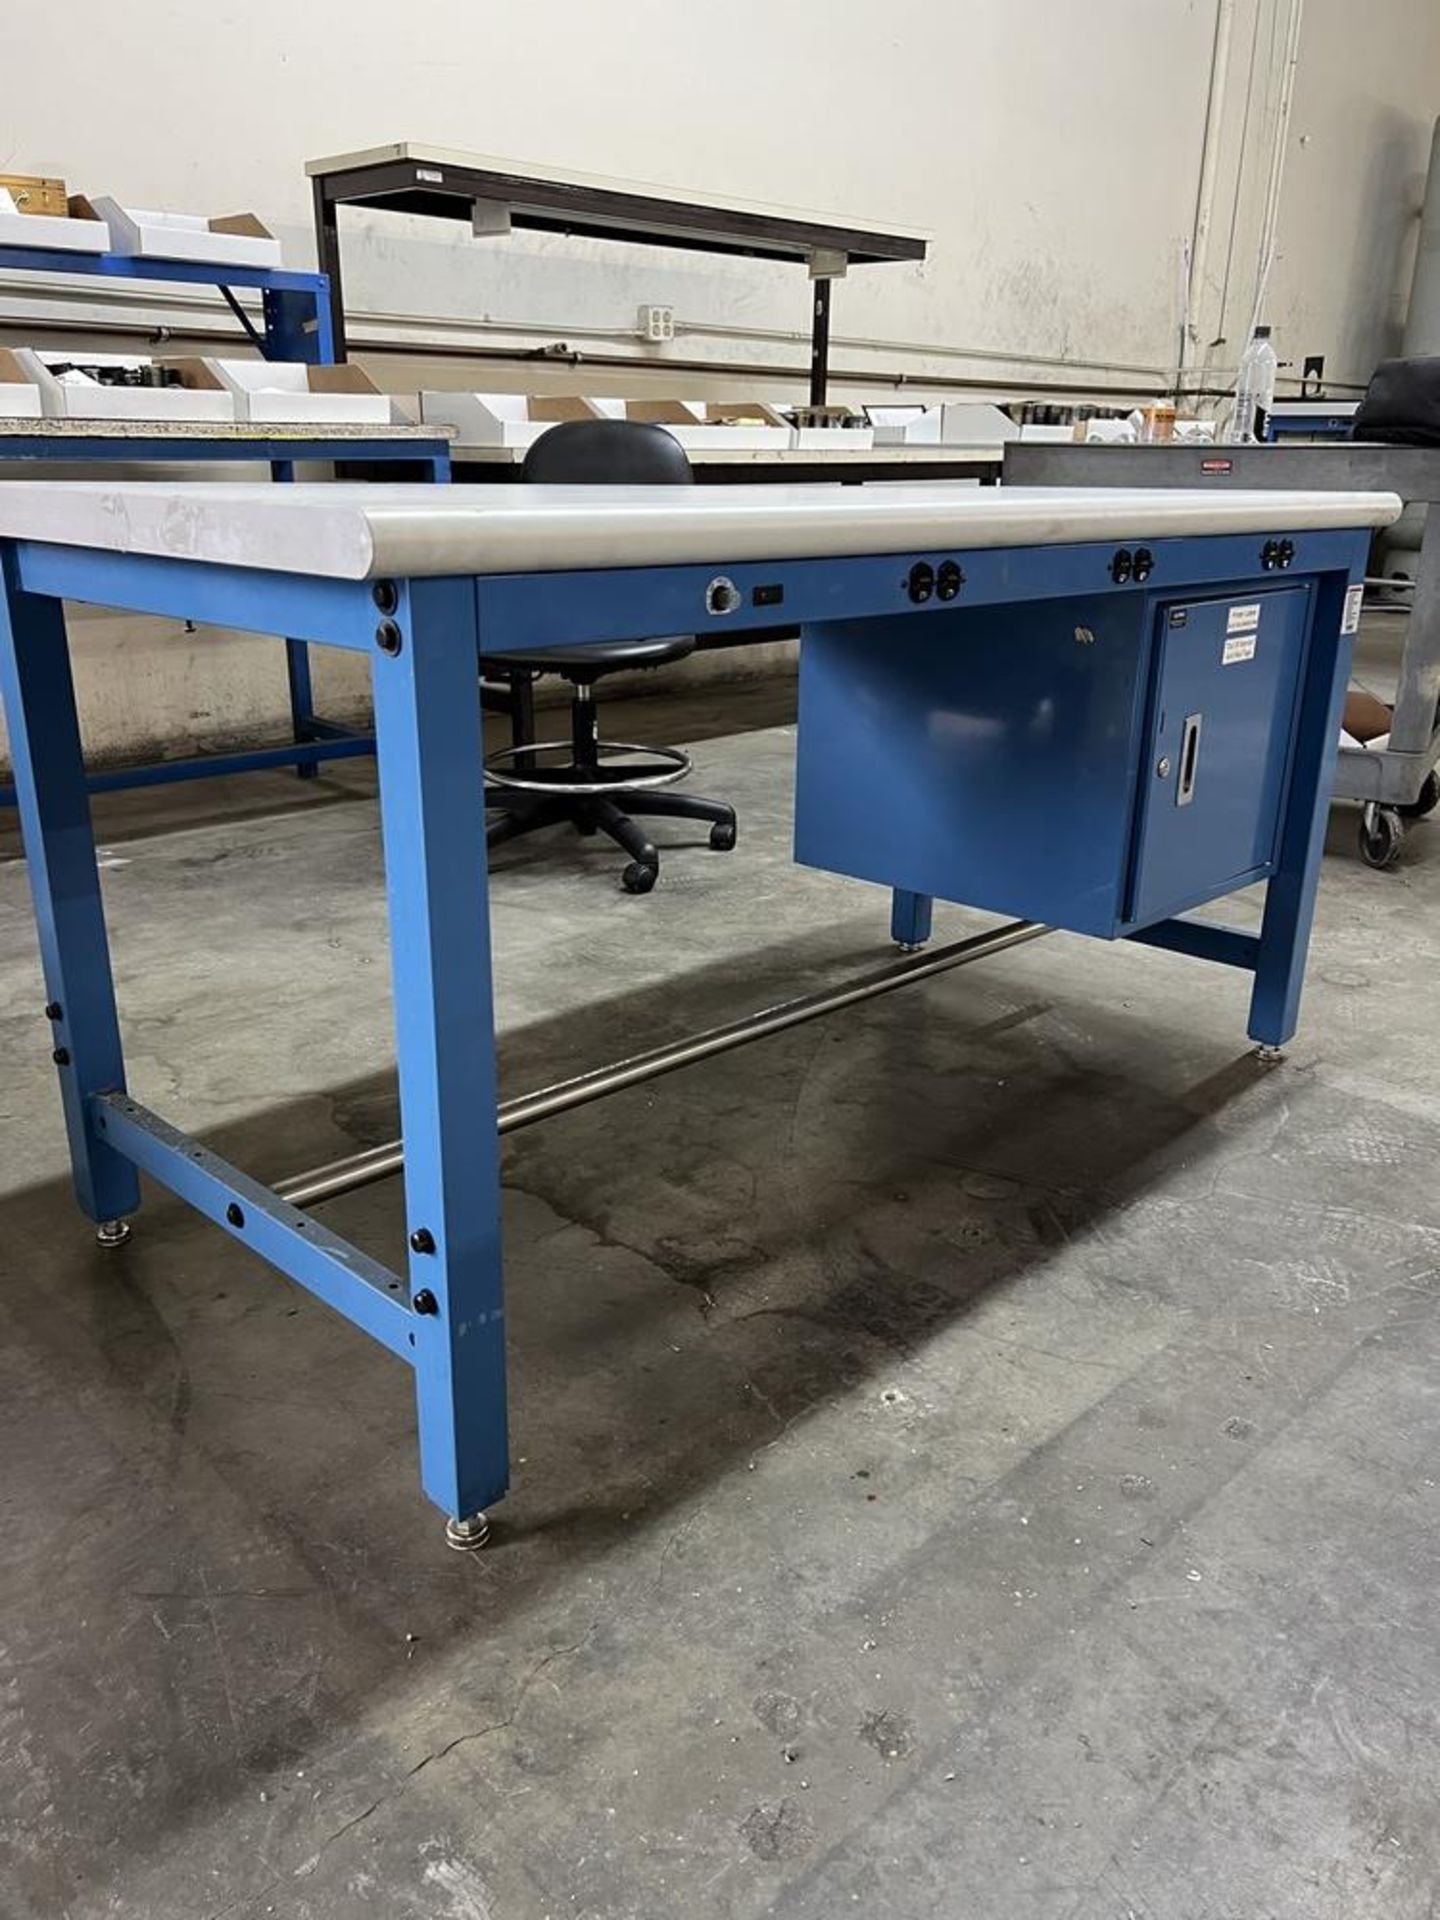 Z Tier Global Industrial Adjustable Work Table With Cabinet & Power Adapters 60" x 30" x 30" - Image 4 of 5